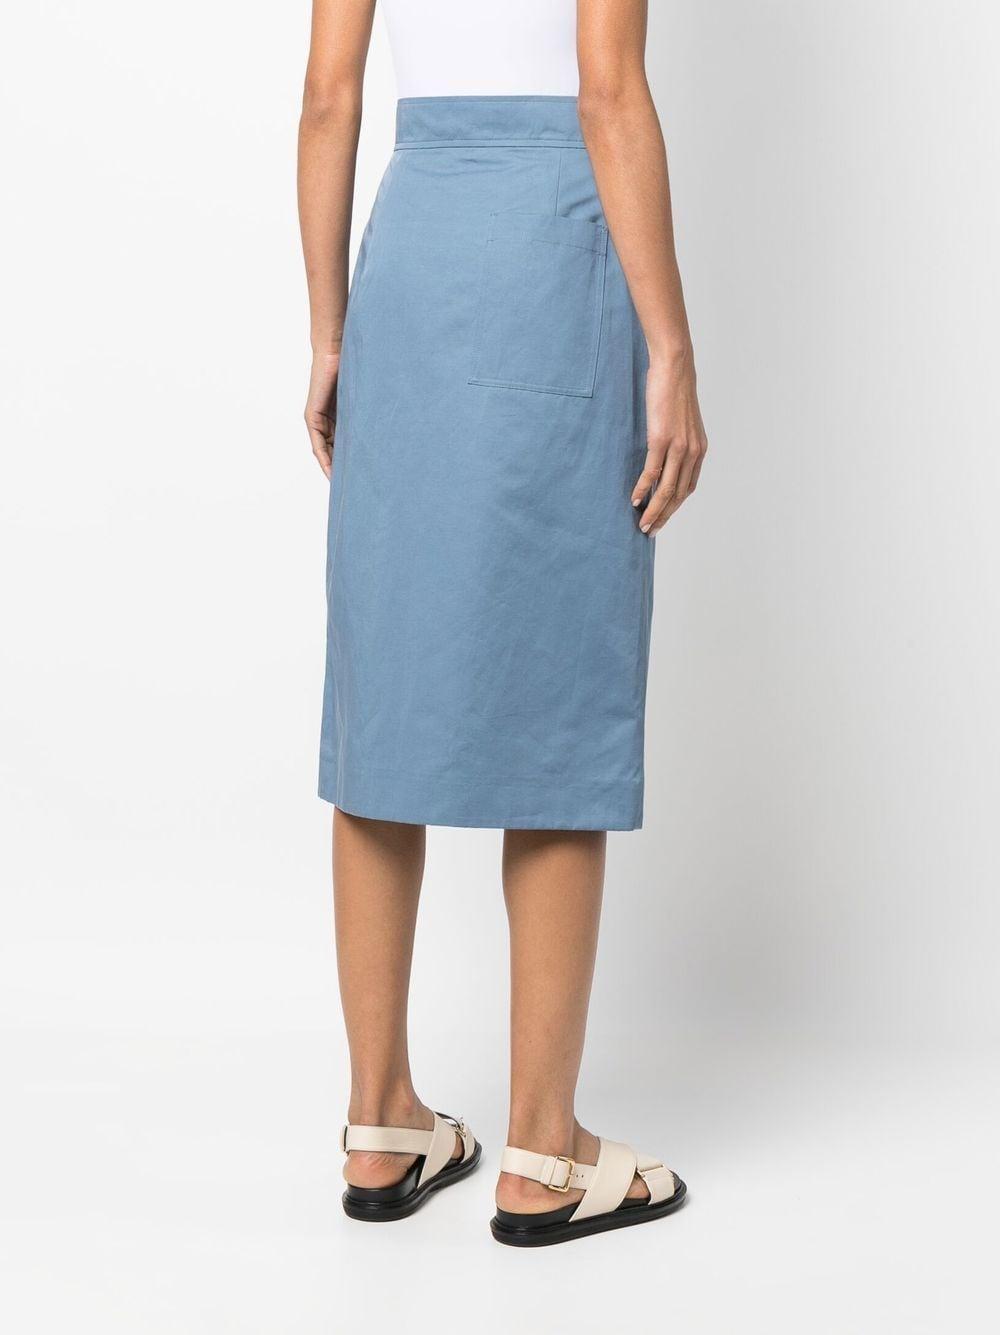 Paul Smith Button-front High-waisted Skirt in Blue | Lyst